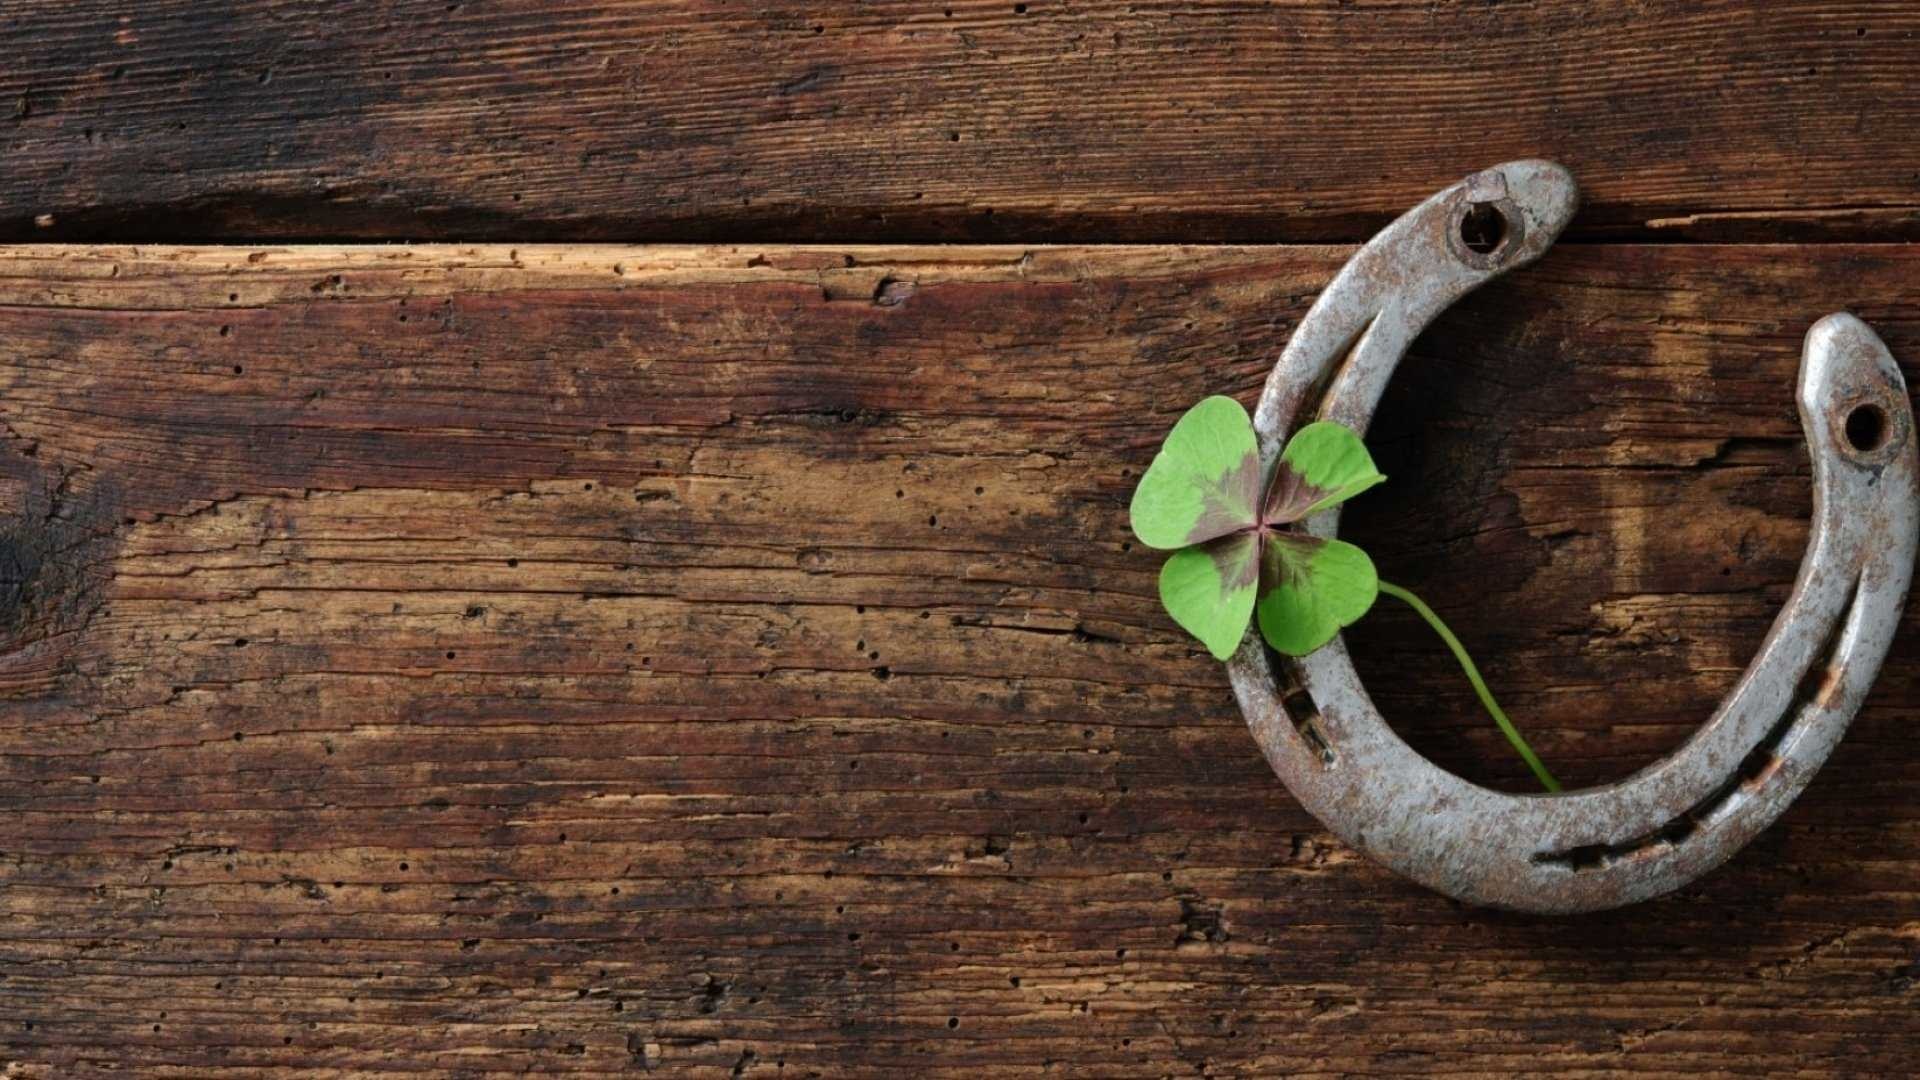 Good Luck: A horseshoe and a four-leaf clover, The most well-known symbols of luck. 1920x1080 Full HD Wallpaper.